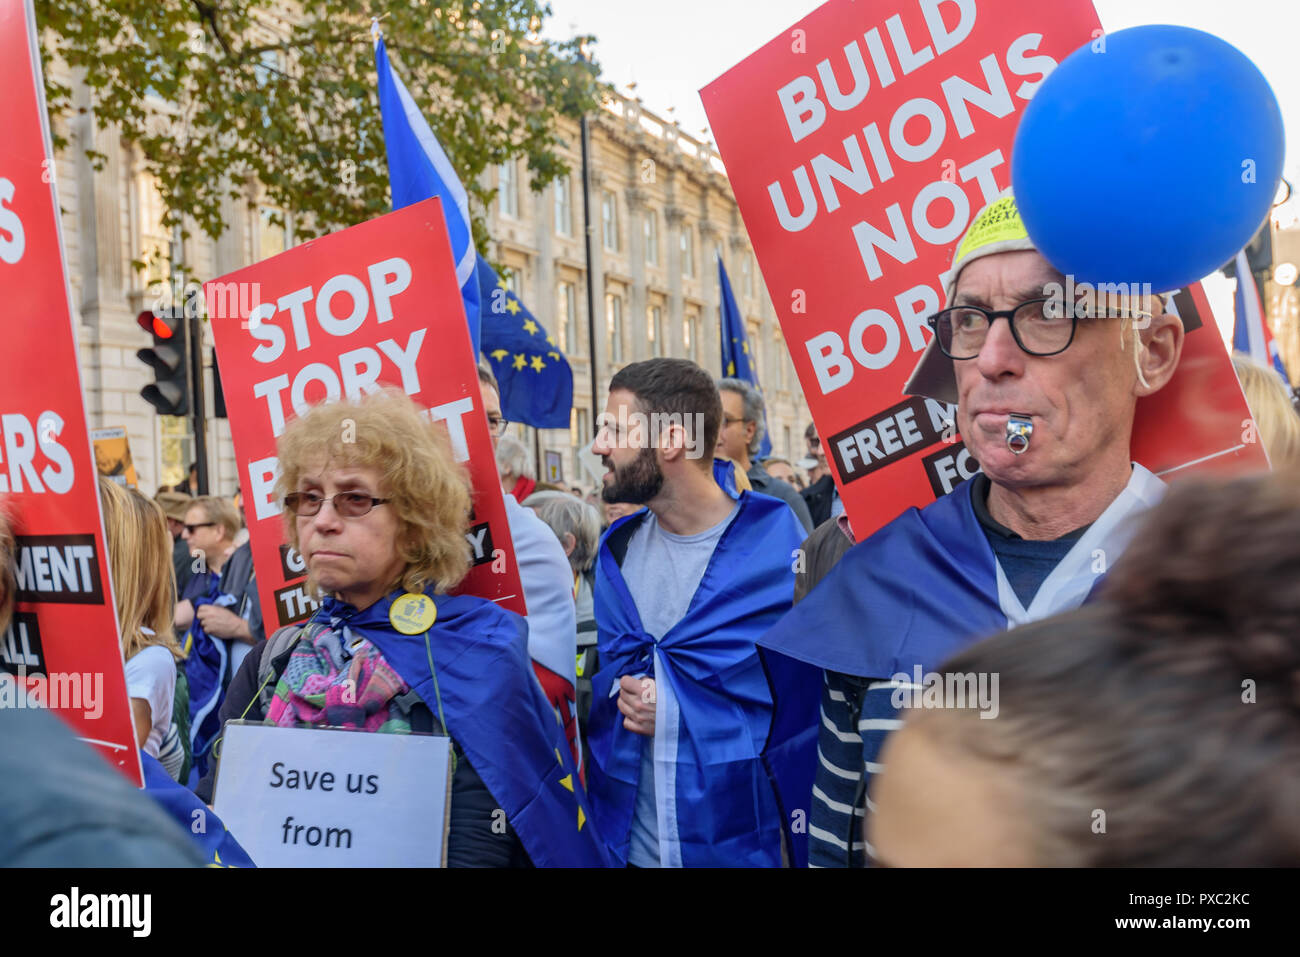 London, UK. 20th October 2018. Marchers walk past down Whitehall at the end of the People's Vote March calling for a vote to give the final say on the Brexit deal or failure to get a deal. They say the new evidence which has come out since the referendum makes it essential to get a new mandate from the people to leave the EU. With so many on the march the crowding meant many failed to reach Parliament Square and came to a halt in Whitehall. Peter Marshall/Alamy Live News Stock Photo